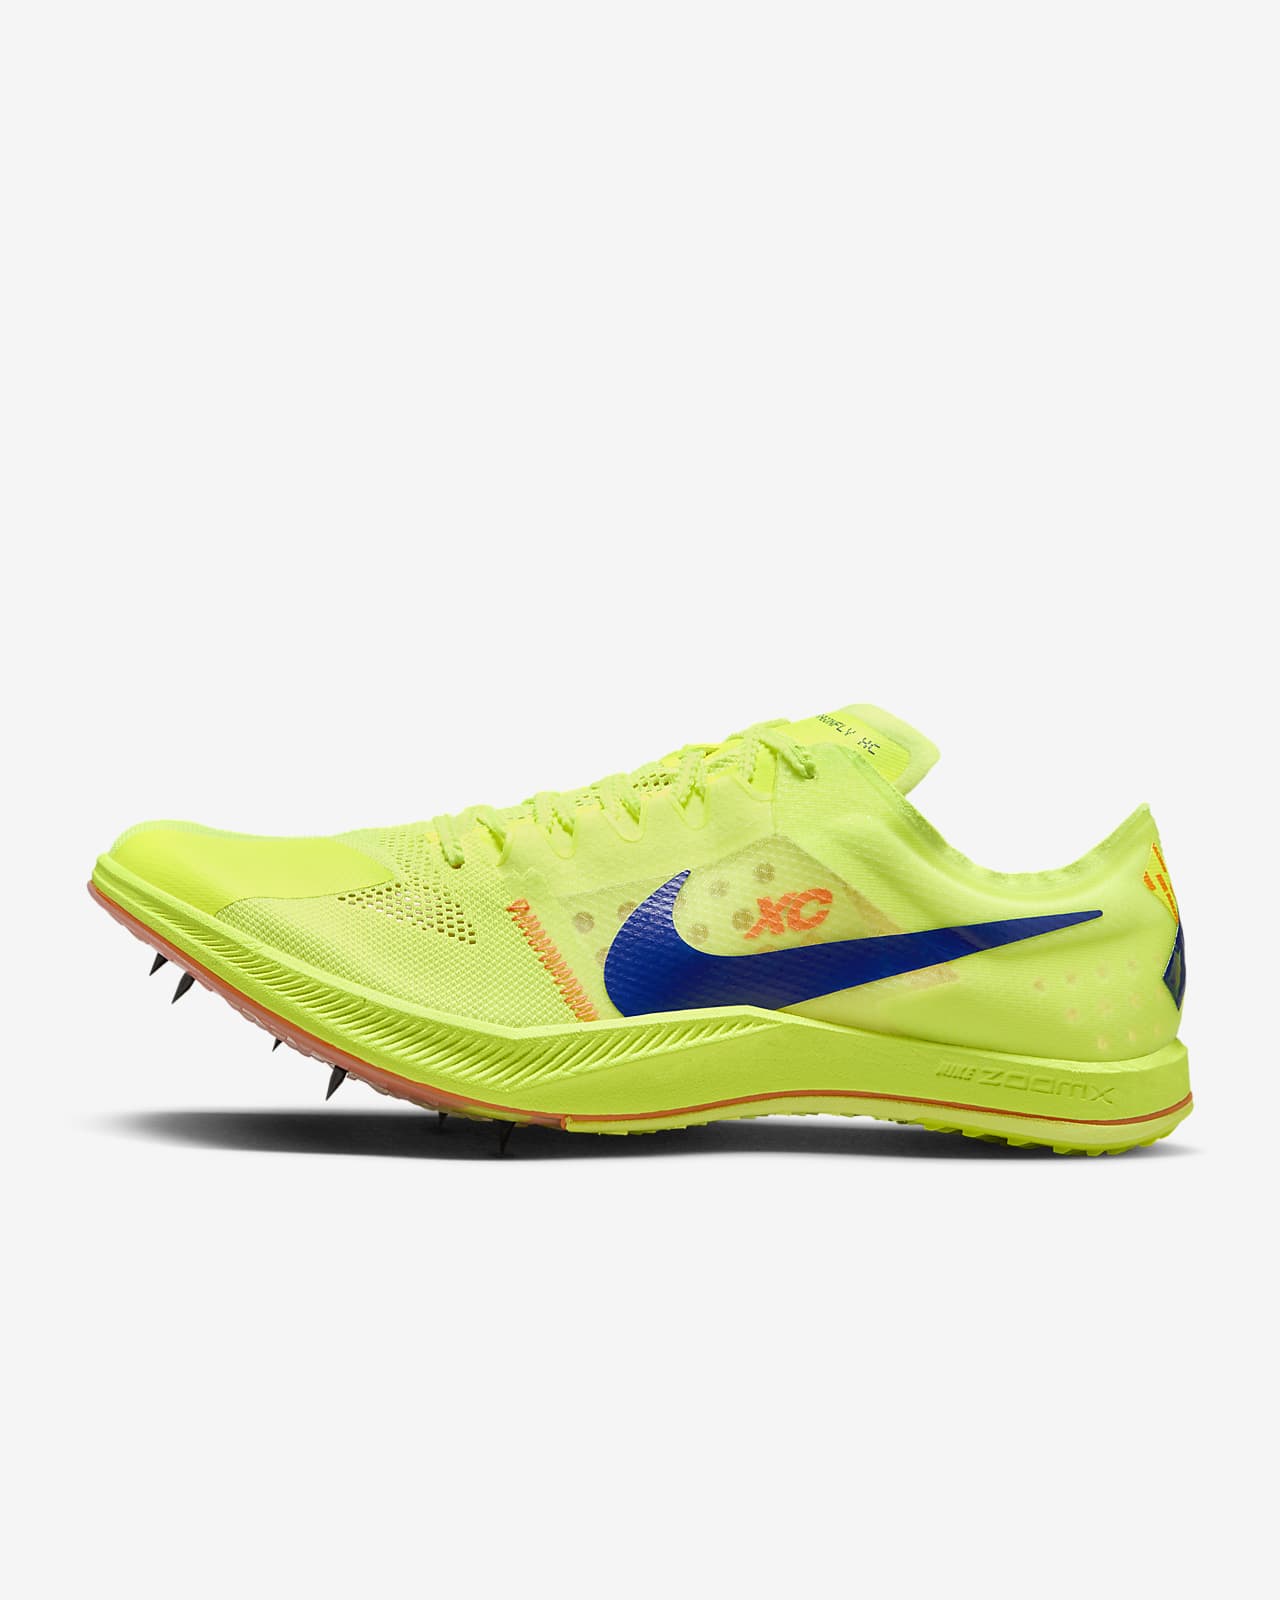 Nike ZoomX Dragonfly XC Cross-Country-Spikes